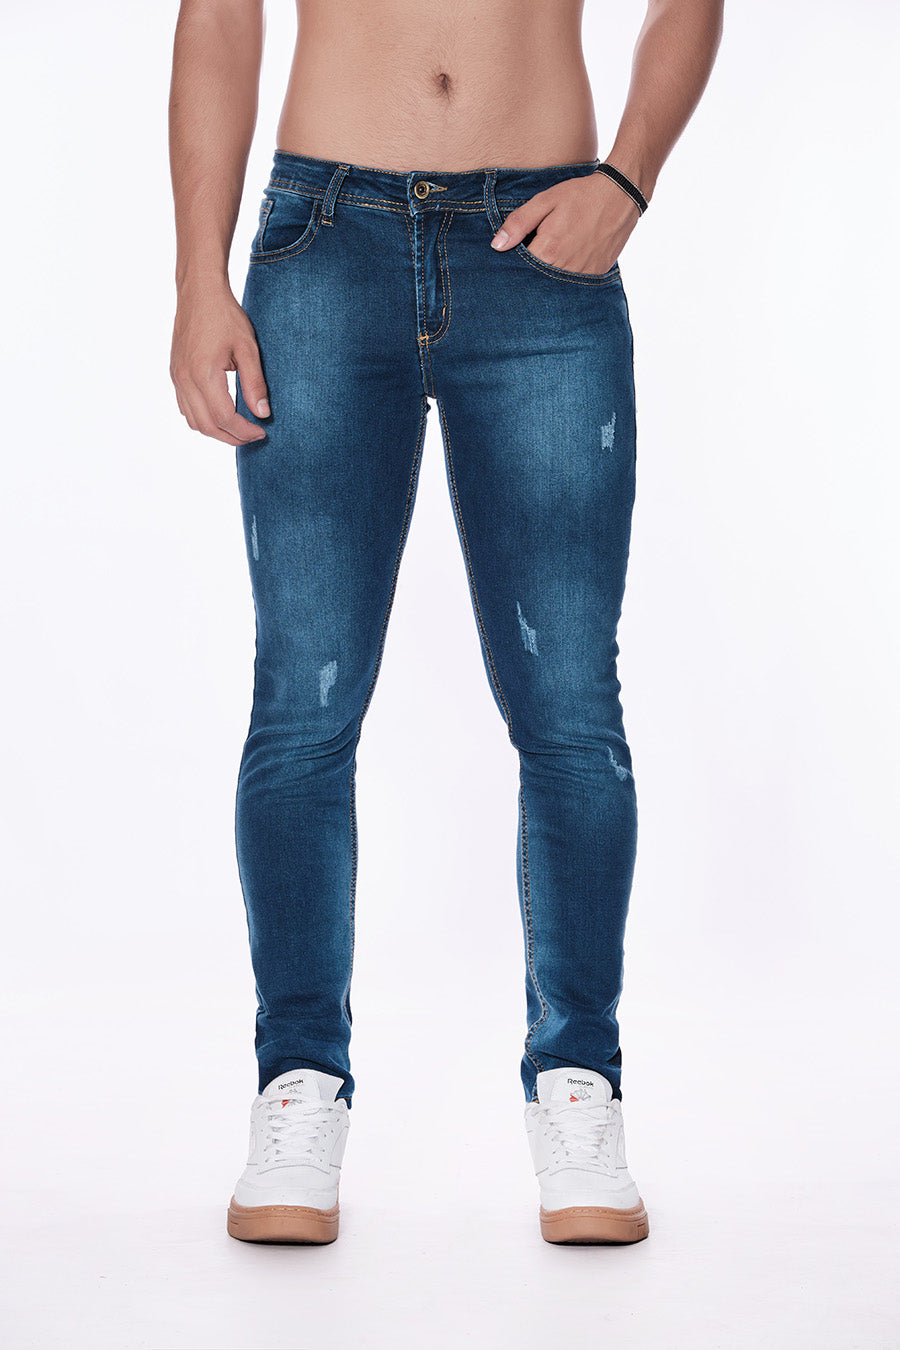 Esencial Jean Skinny Hombre 21122309-48 STAGEJEANS